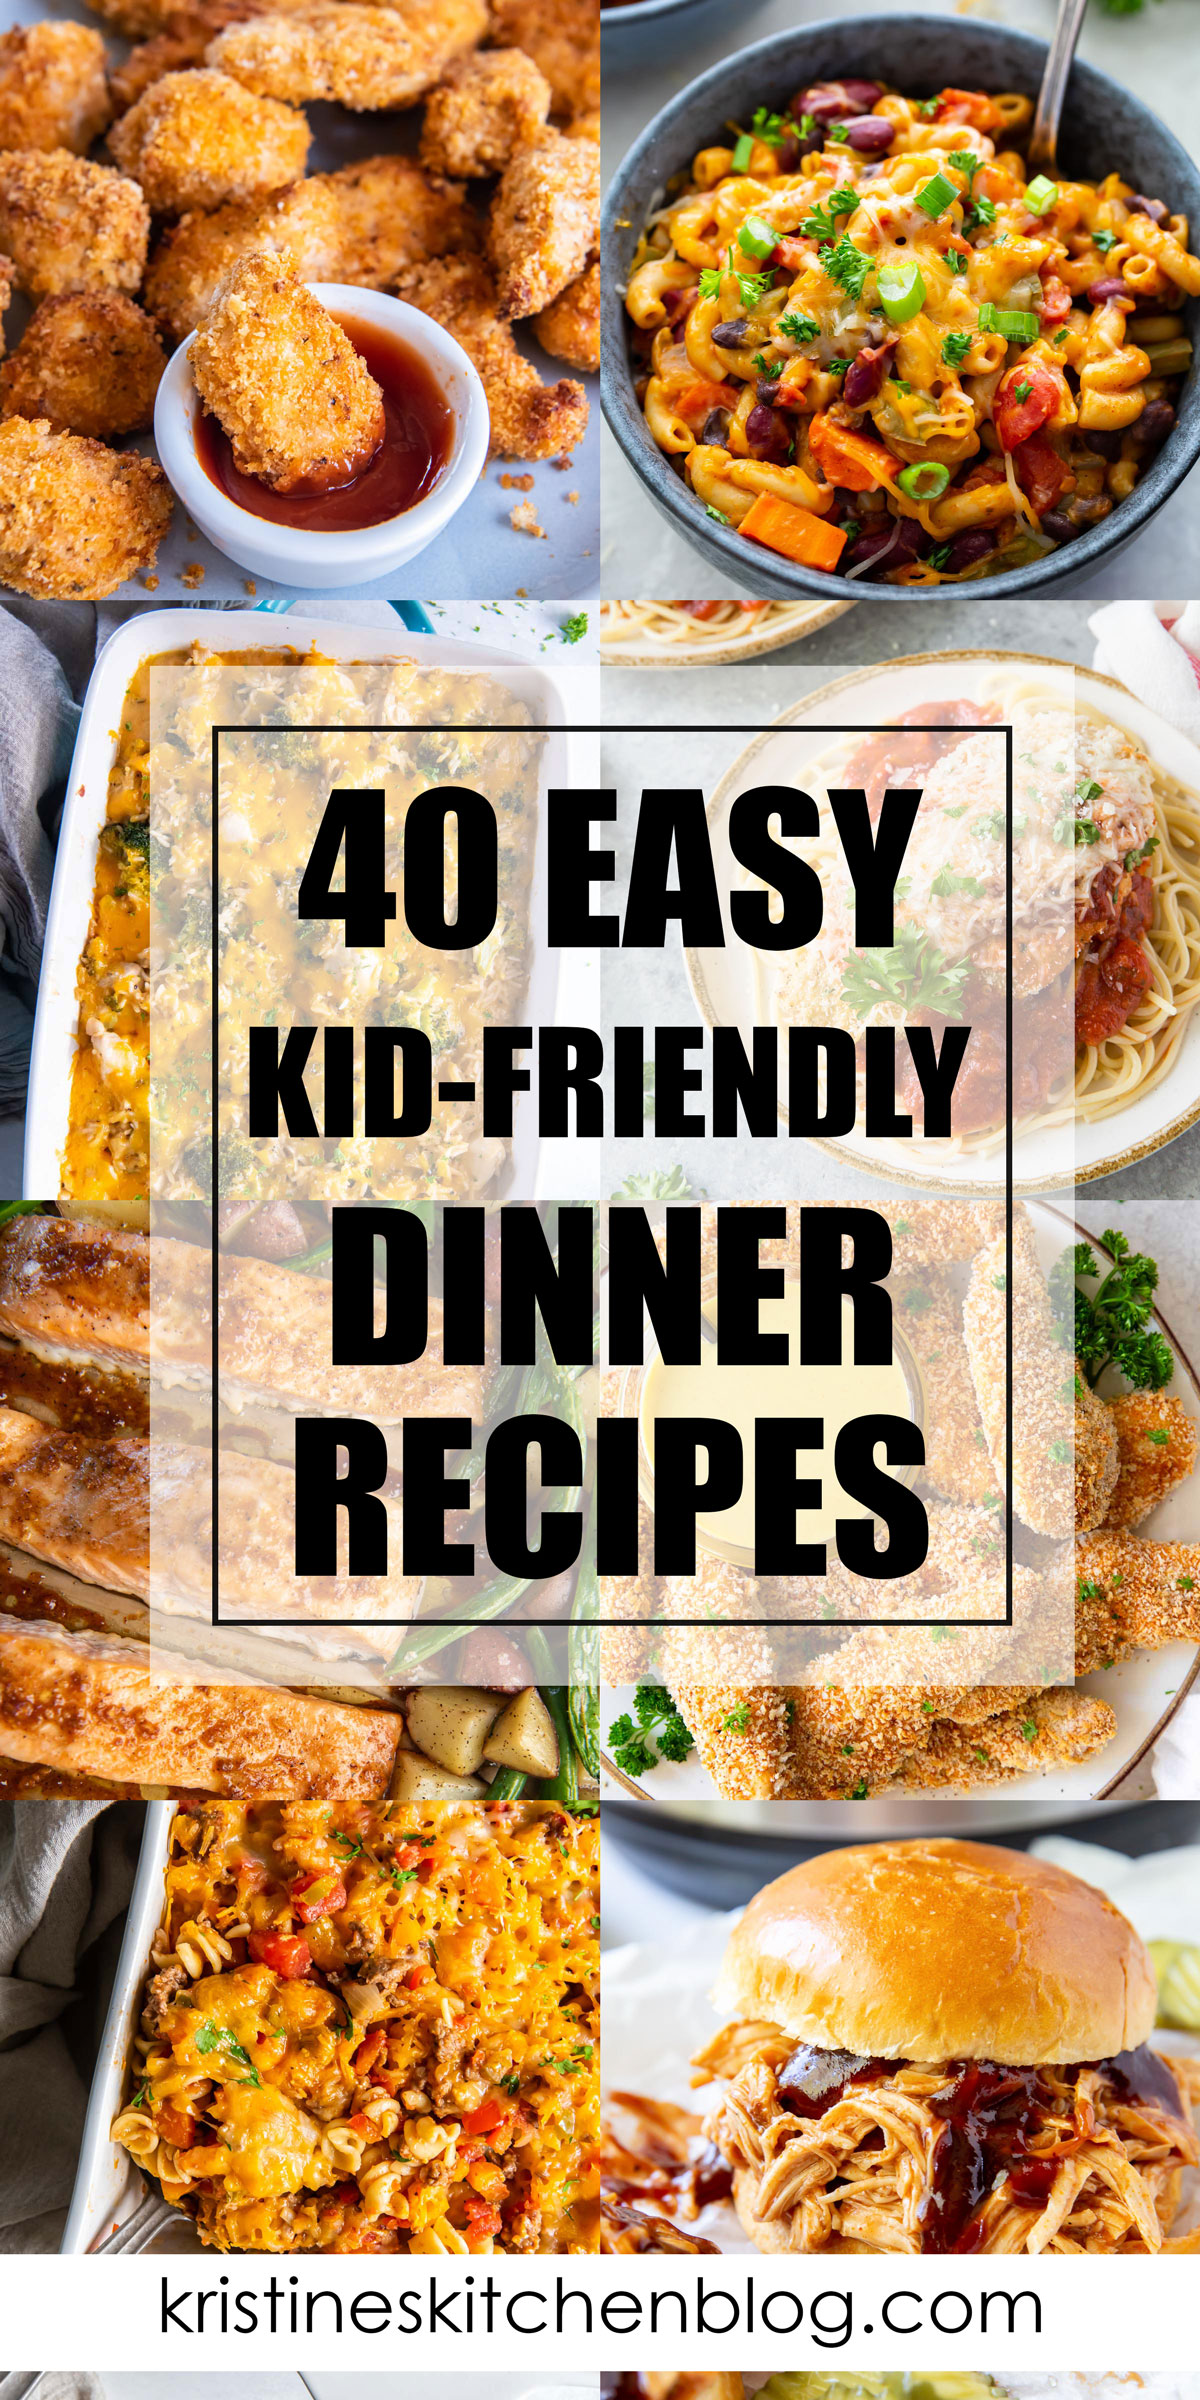 Collage of 8 kid-friendly dinner recipes with text overlay.